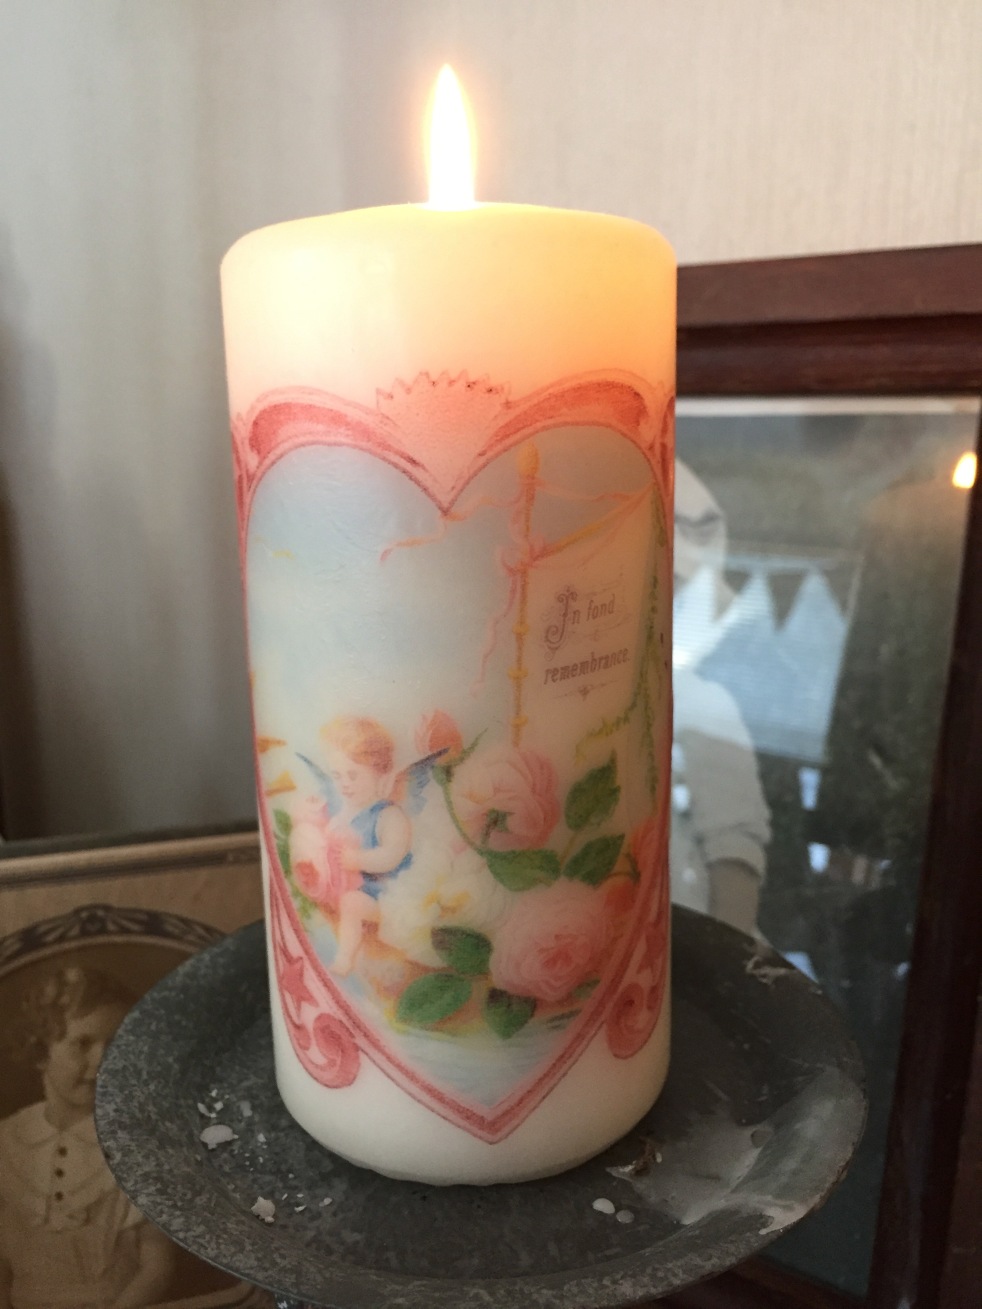 Wings of Whimsy: DIY Romantic Pillar Candles #romantic #valtentine #pillar #candle #instructions